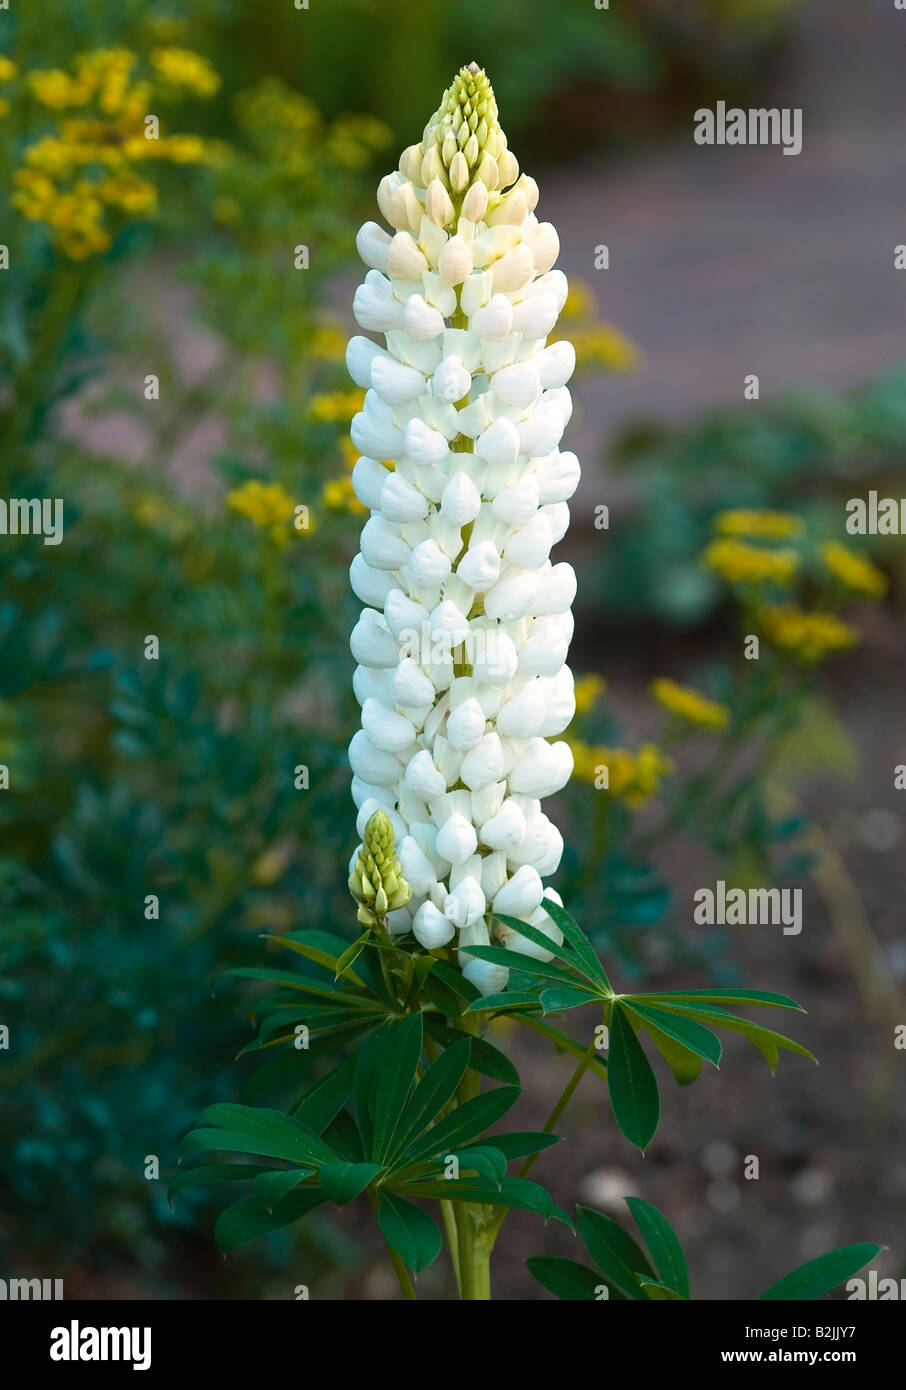 LUPINUS REGALIS BAND OF NOBLES SERIES LUPIN Stock Photo